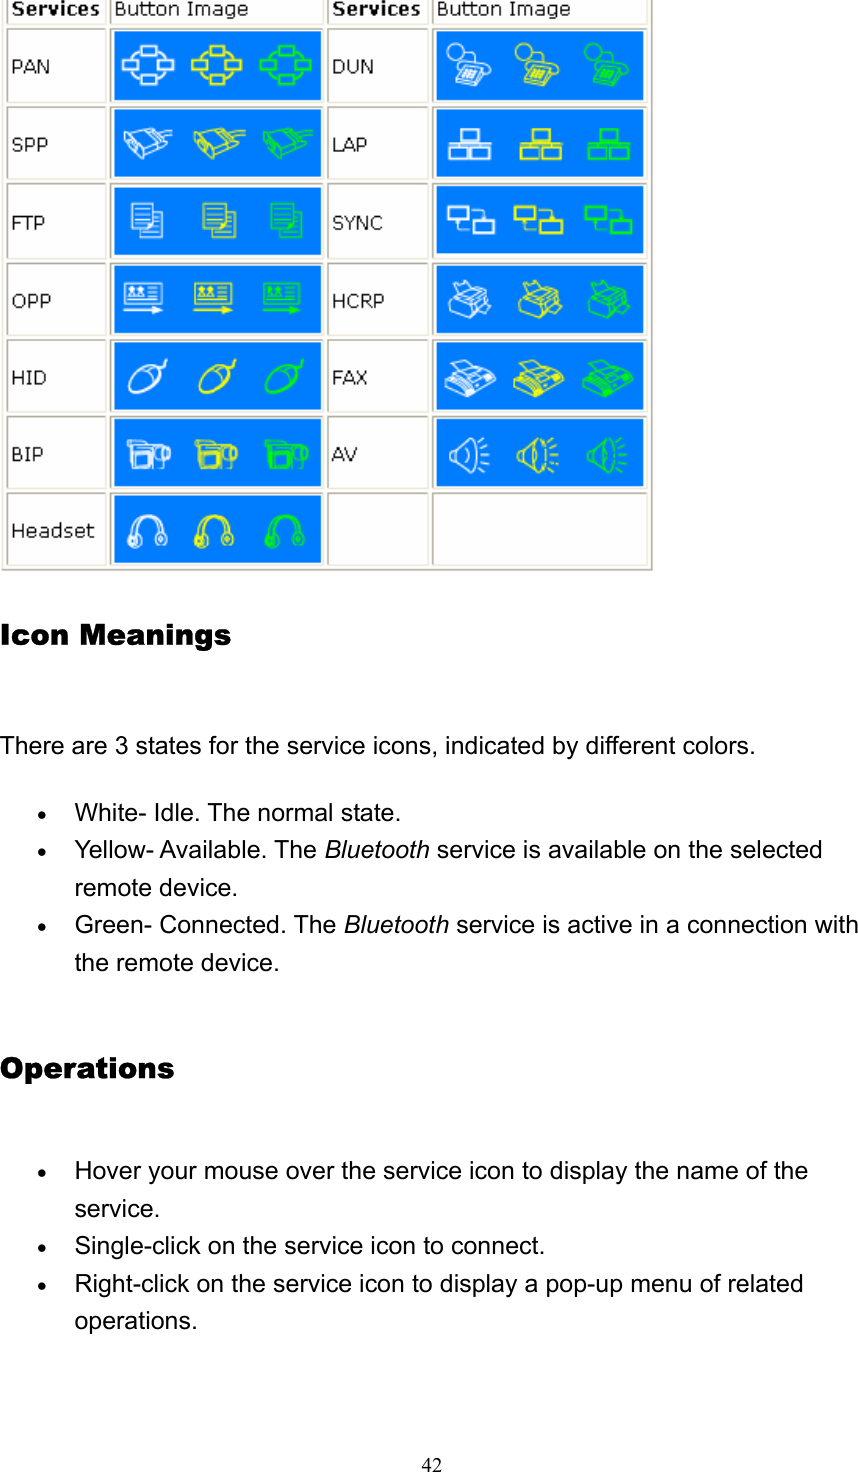   42 Icon Meanings  There are 3 states for the service icons, indicated by different colors.   • White- Idle. The normal state.   • Yellow- Available. The Bluetooth service is available on the selected remote device.   • Green- Connected. The Bluetooth service is active in a connection with the remote device.   Operations • Hover your mouse over the service icon to display the name of the service.  • Single-click on the service icon to connect.   • Right-click on the service icon to display a pop-up menu of related operations.  